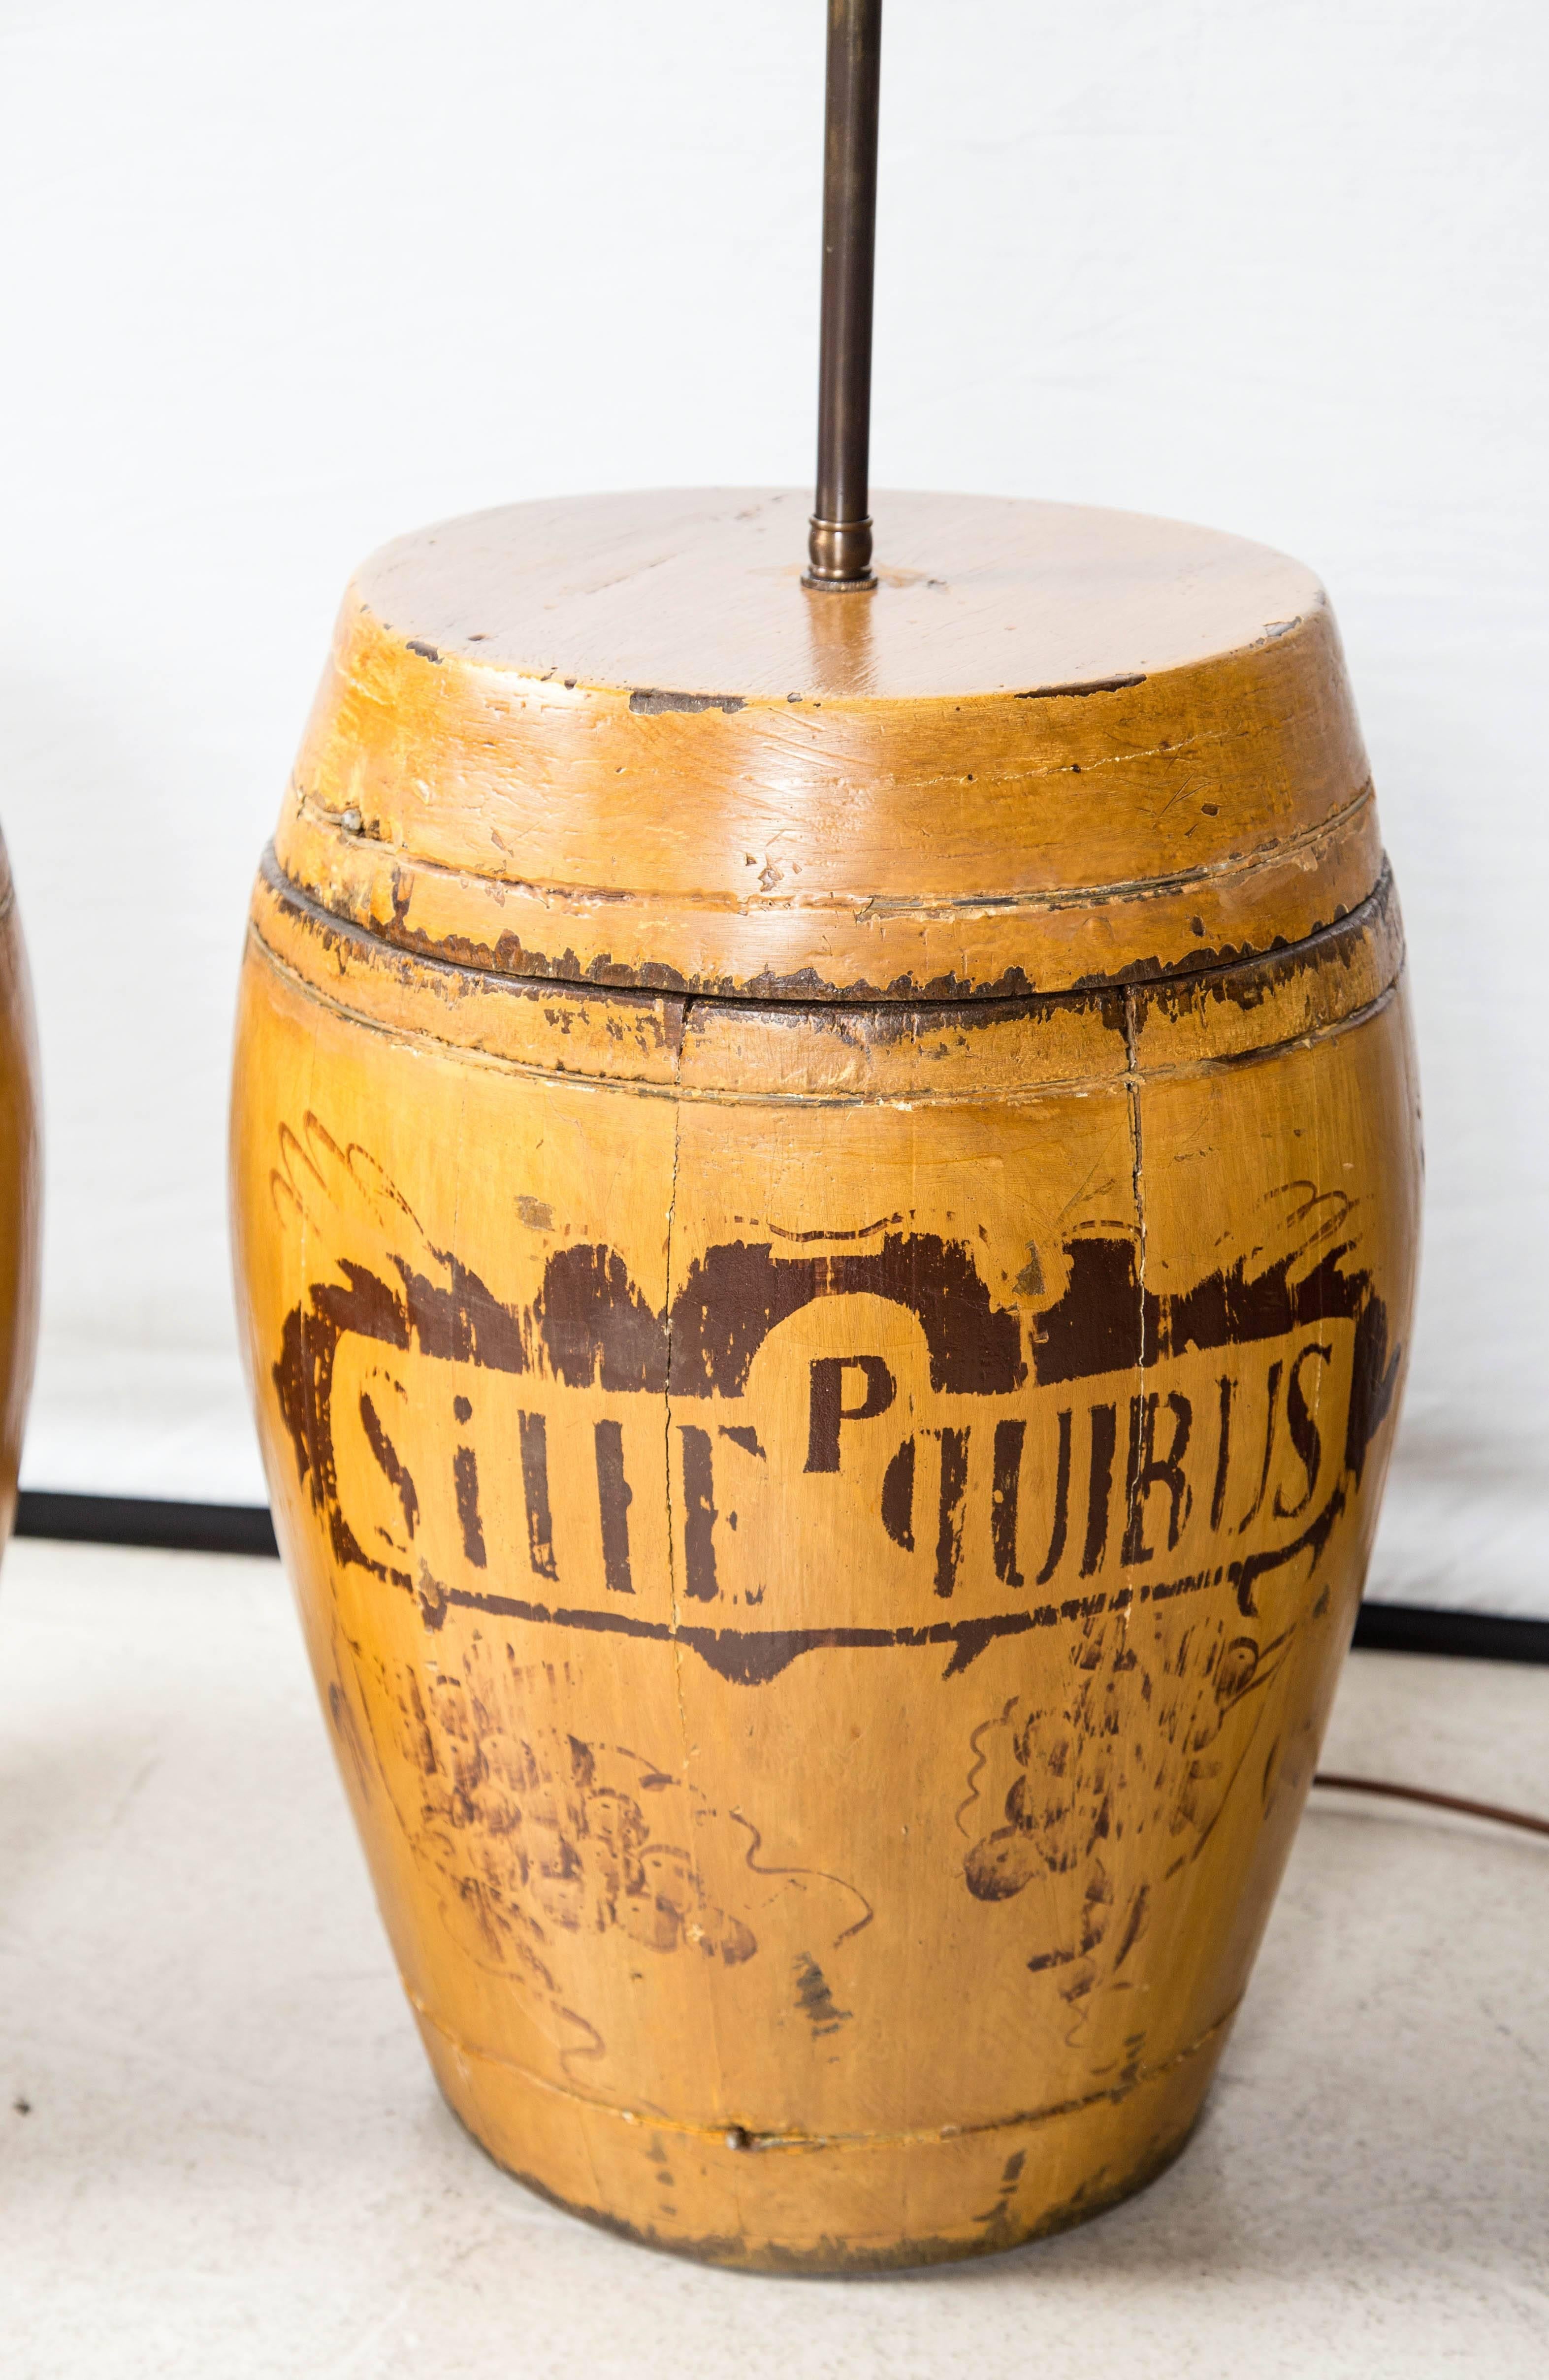 Pair of yellow, antique rice canister lamps. No shades.